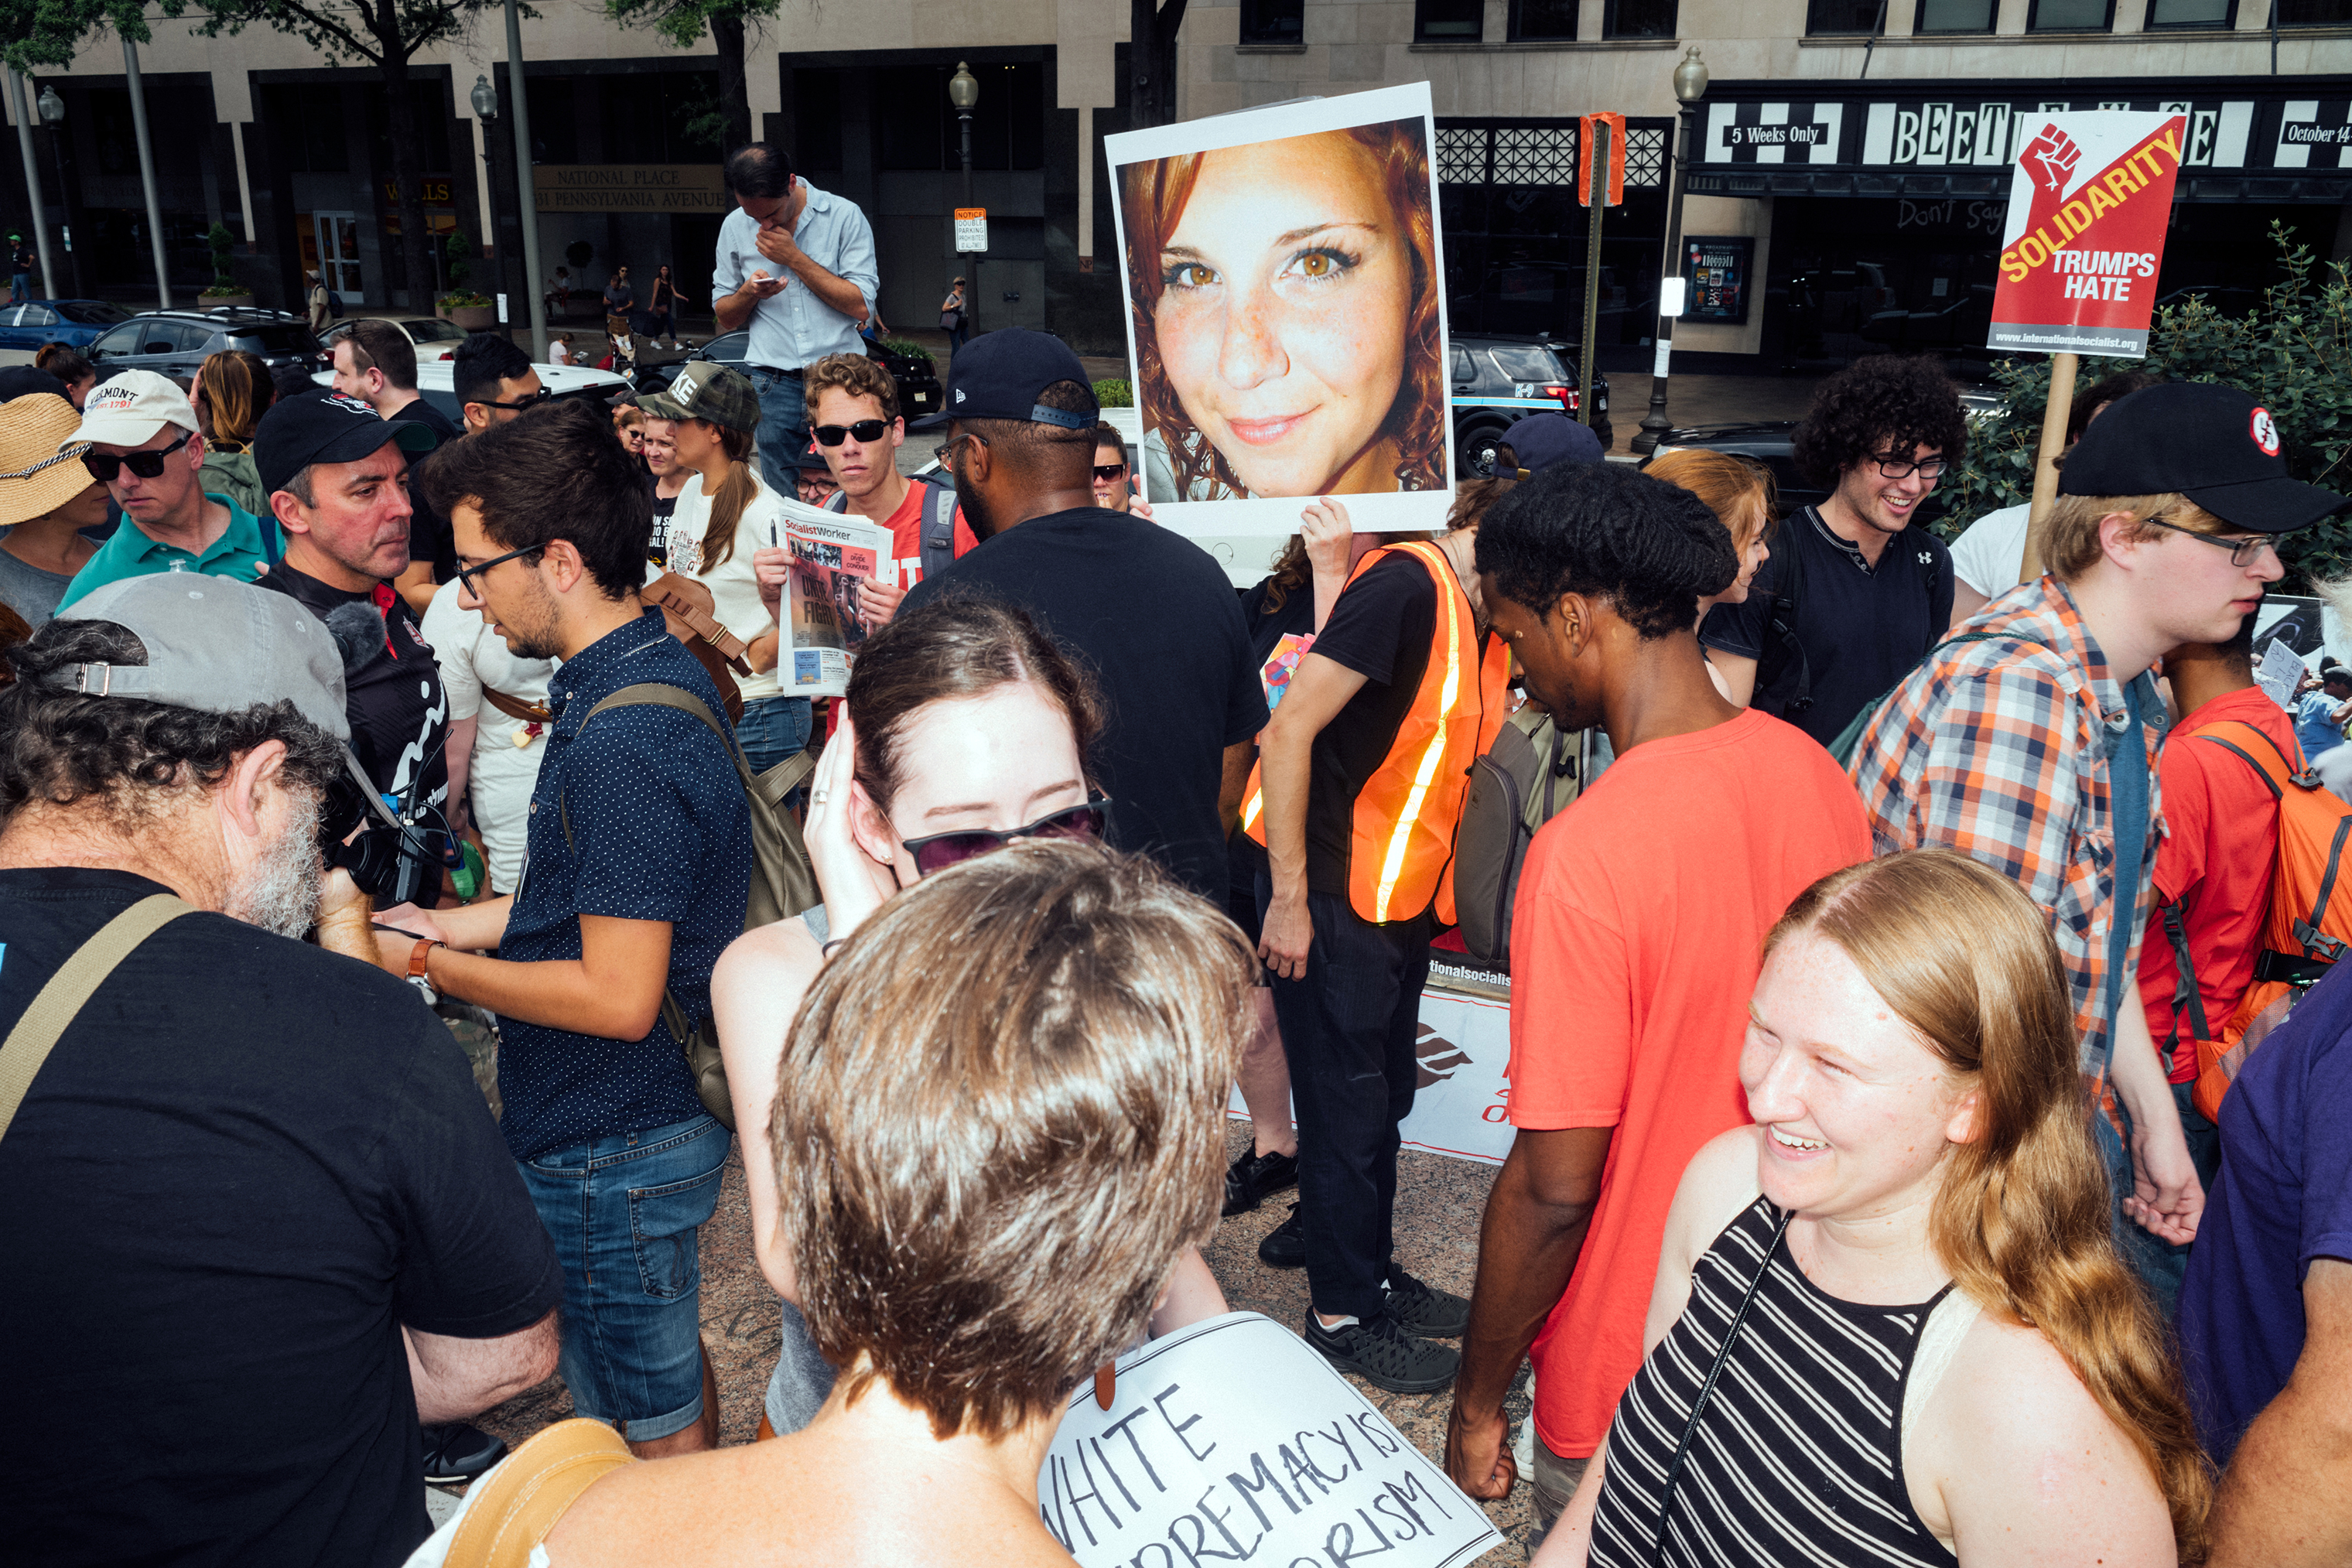 A poster bearing the face of Heather Heyer, who was killed after a vehicle was rammed into a crowd of counter-protesters at the Unite the Right rally in Charlottesville a year earlier. (Daniel Arnold for TIME)